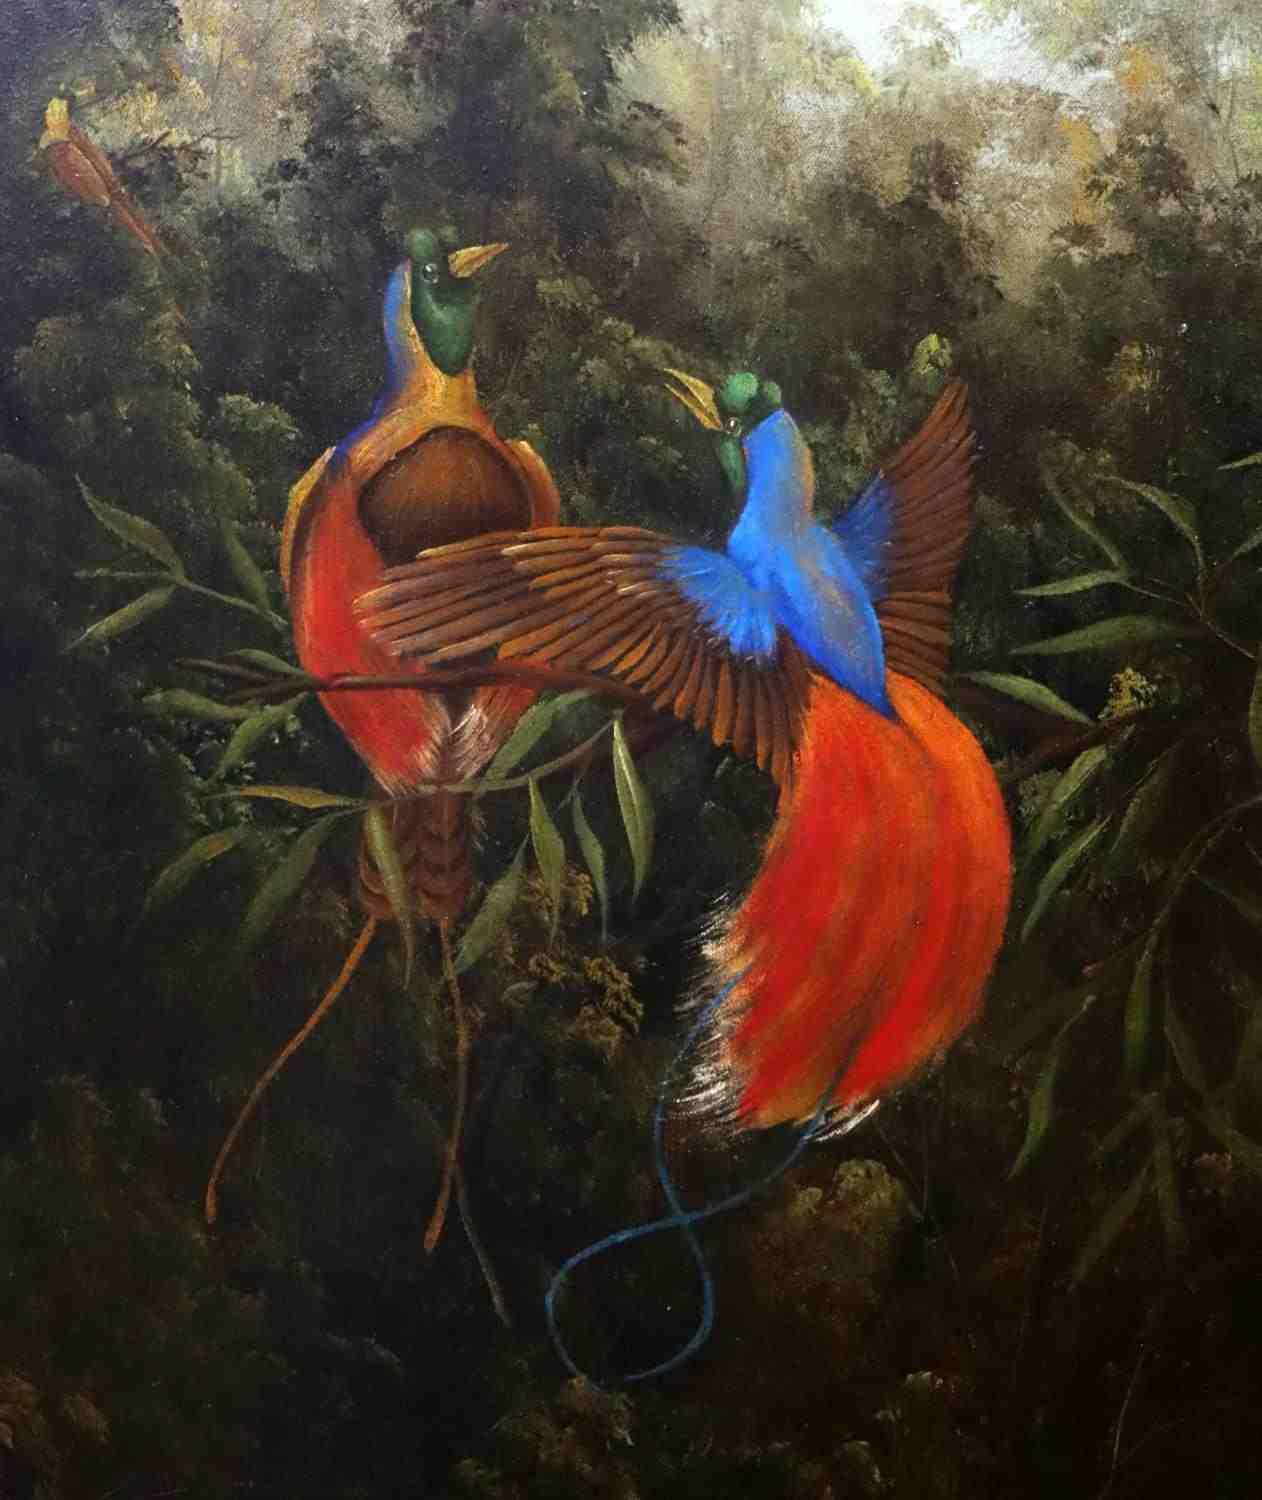 THOS BILBEN TROPICAL BIRDS OF PARADISE PAINTING